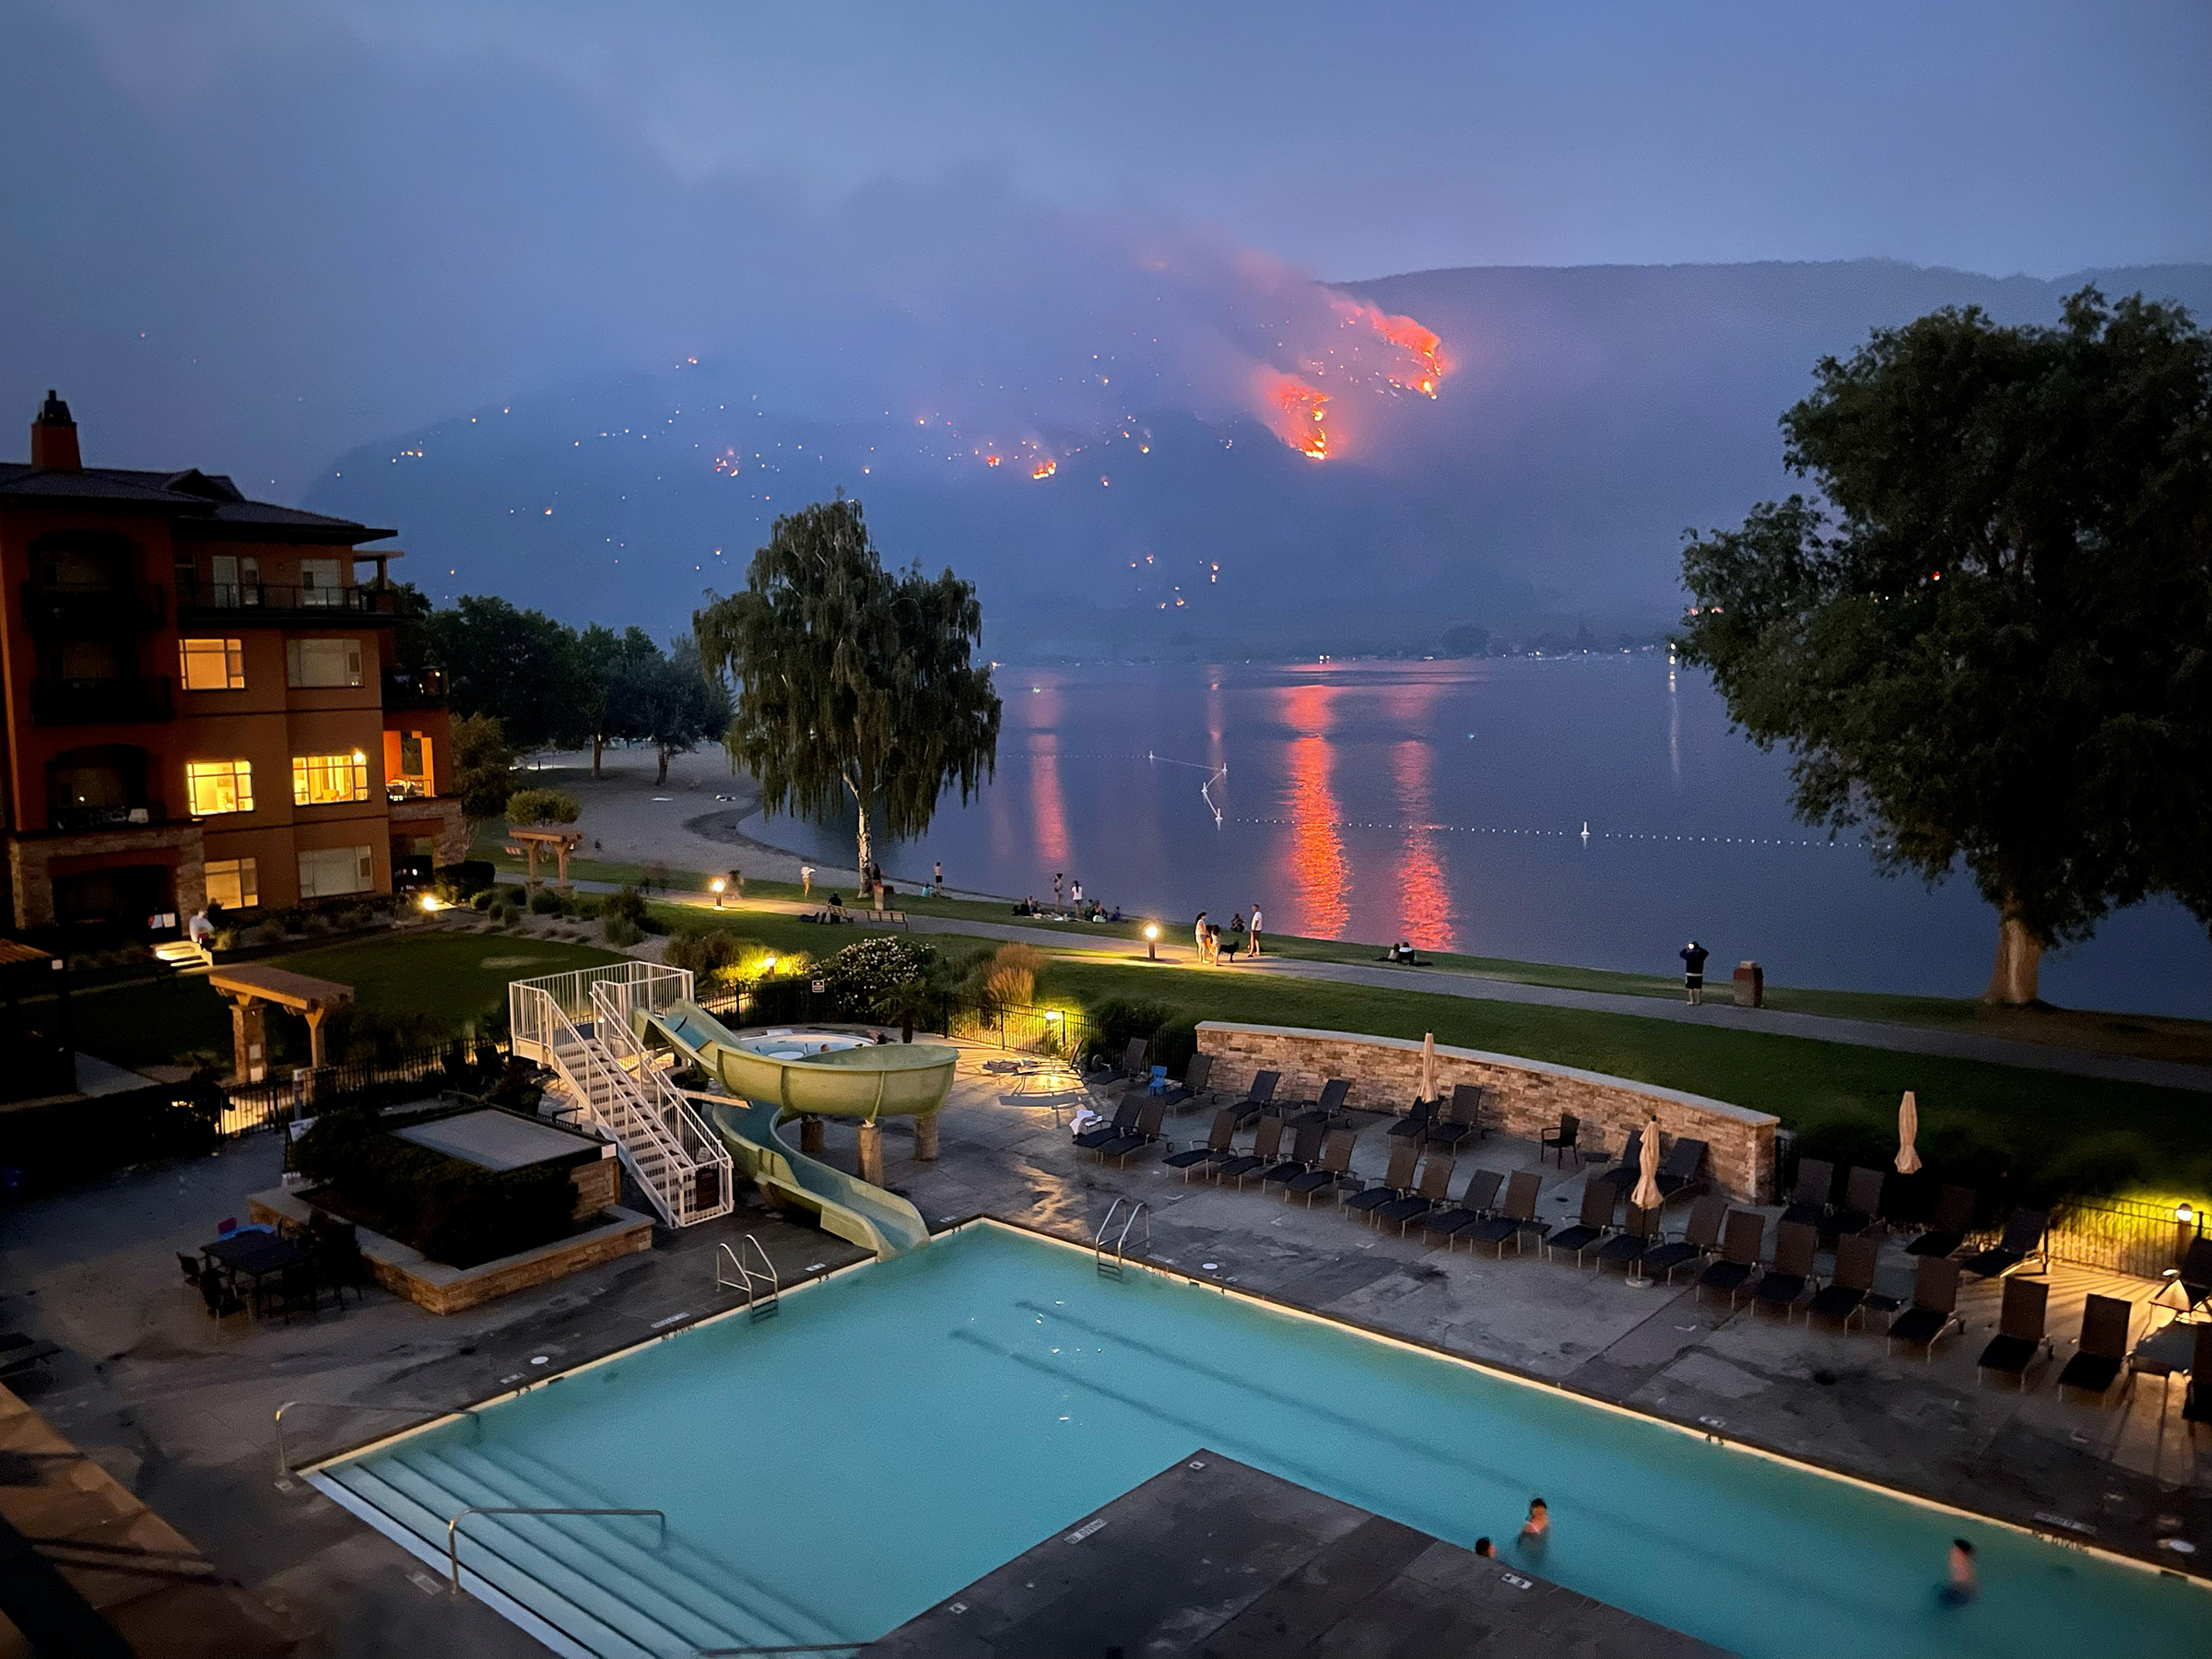 View of a beach resort as a wildfire burns on a hillside in Osoyoos, British Columbia, Canada, on July 20. (Sara Mahony—Reuters)